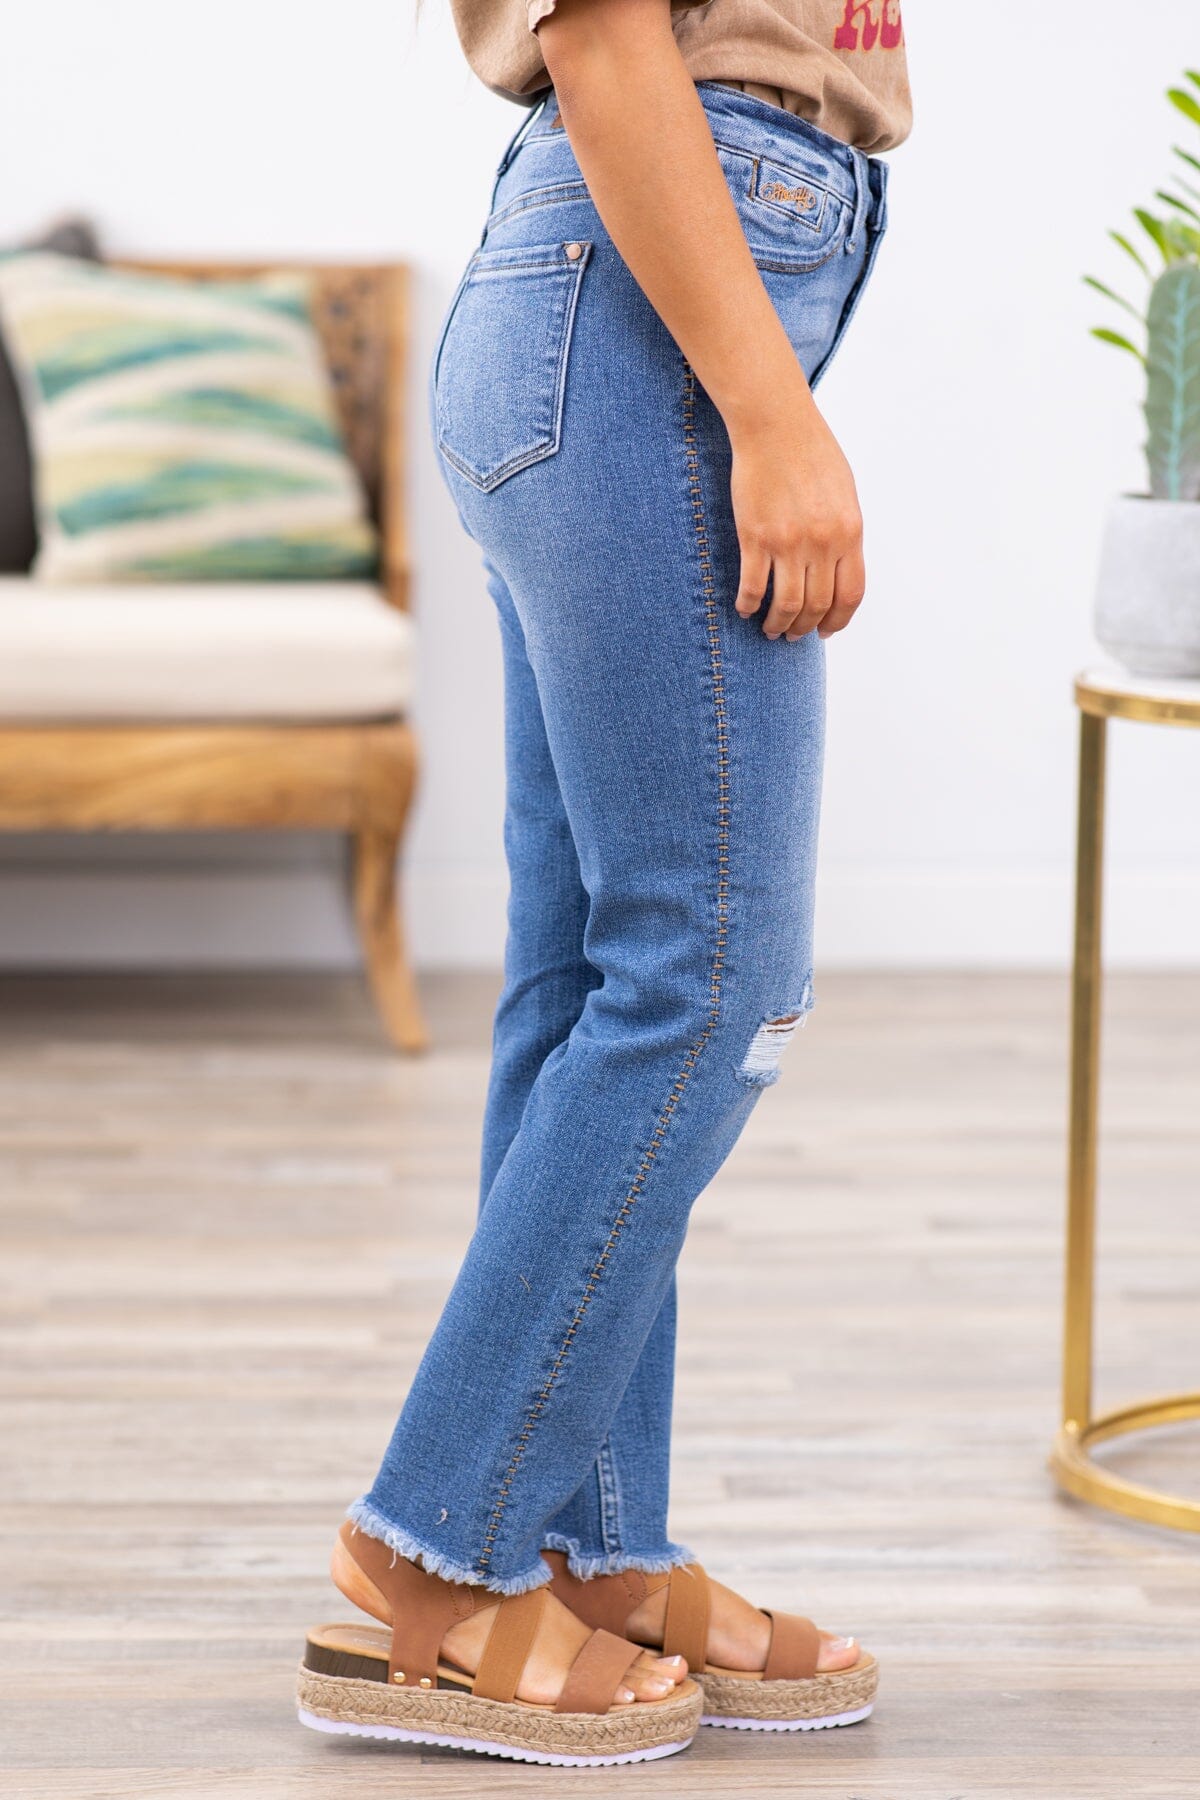 Judy Blue Howdy Embroidered Boyfriend Jeans - Filly Flair